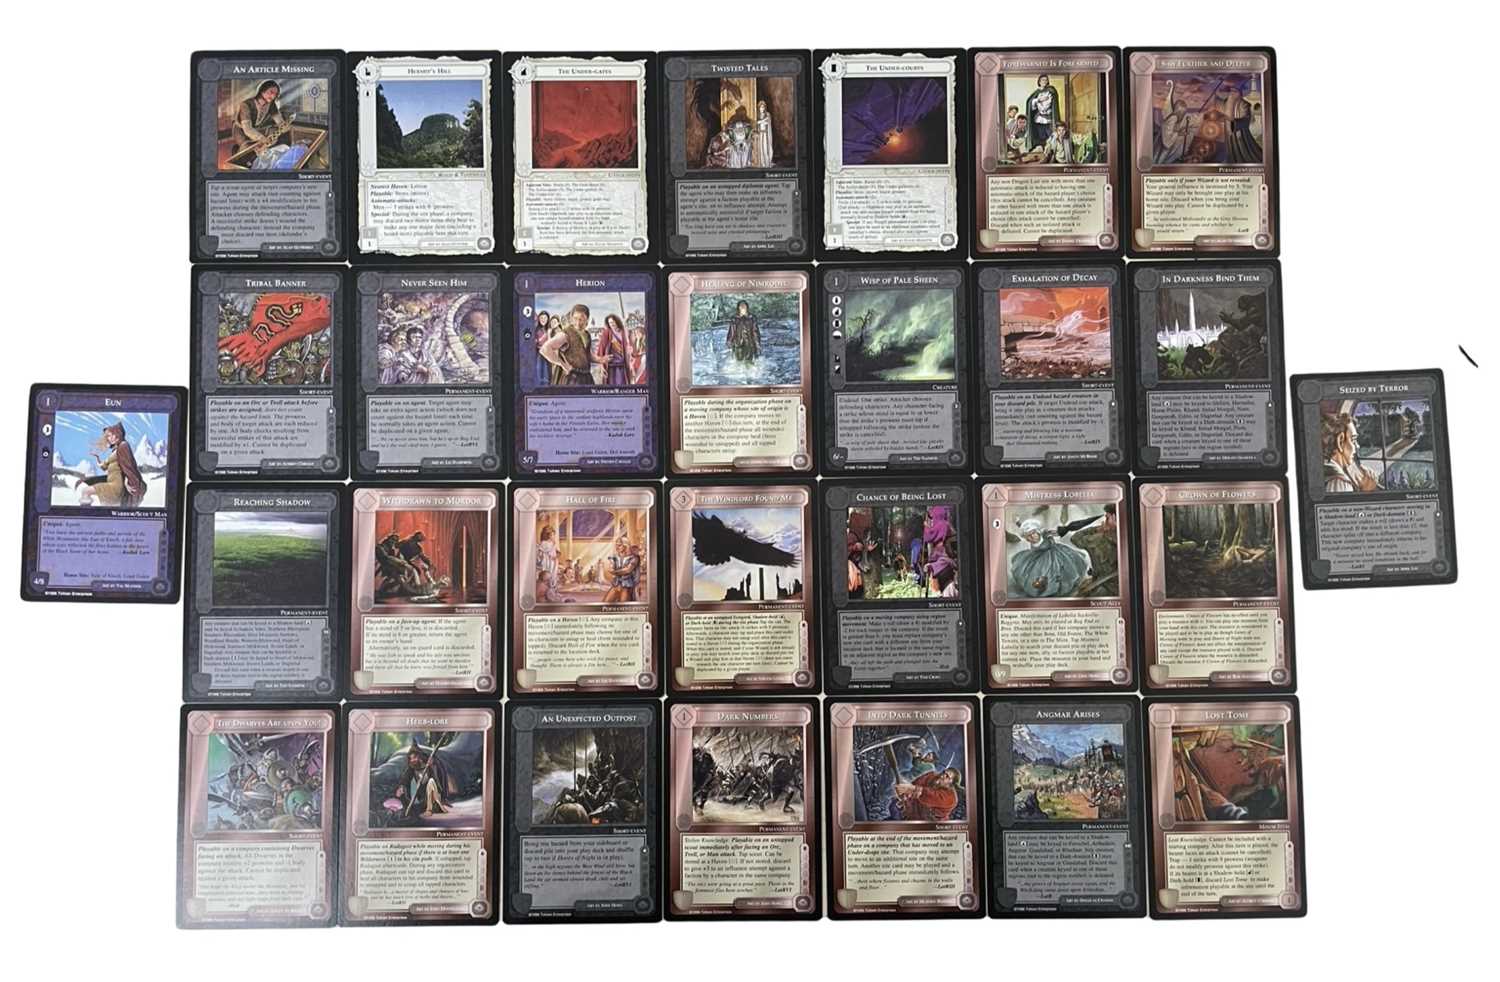 30x 1996 Middle Earth: Dark Minions trading cards, limited edition booster pack editions.